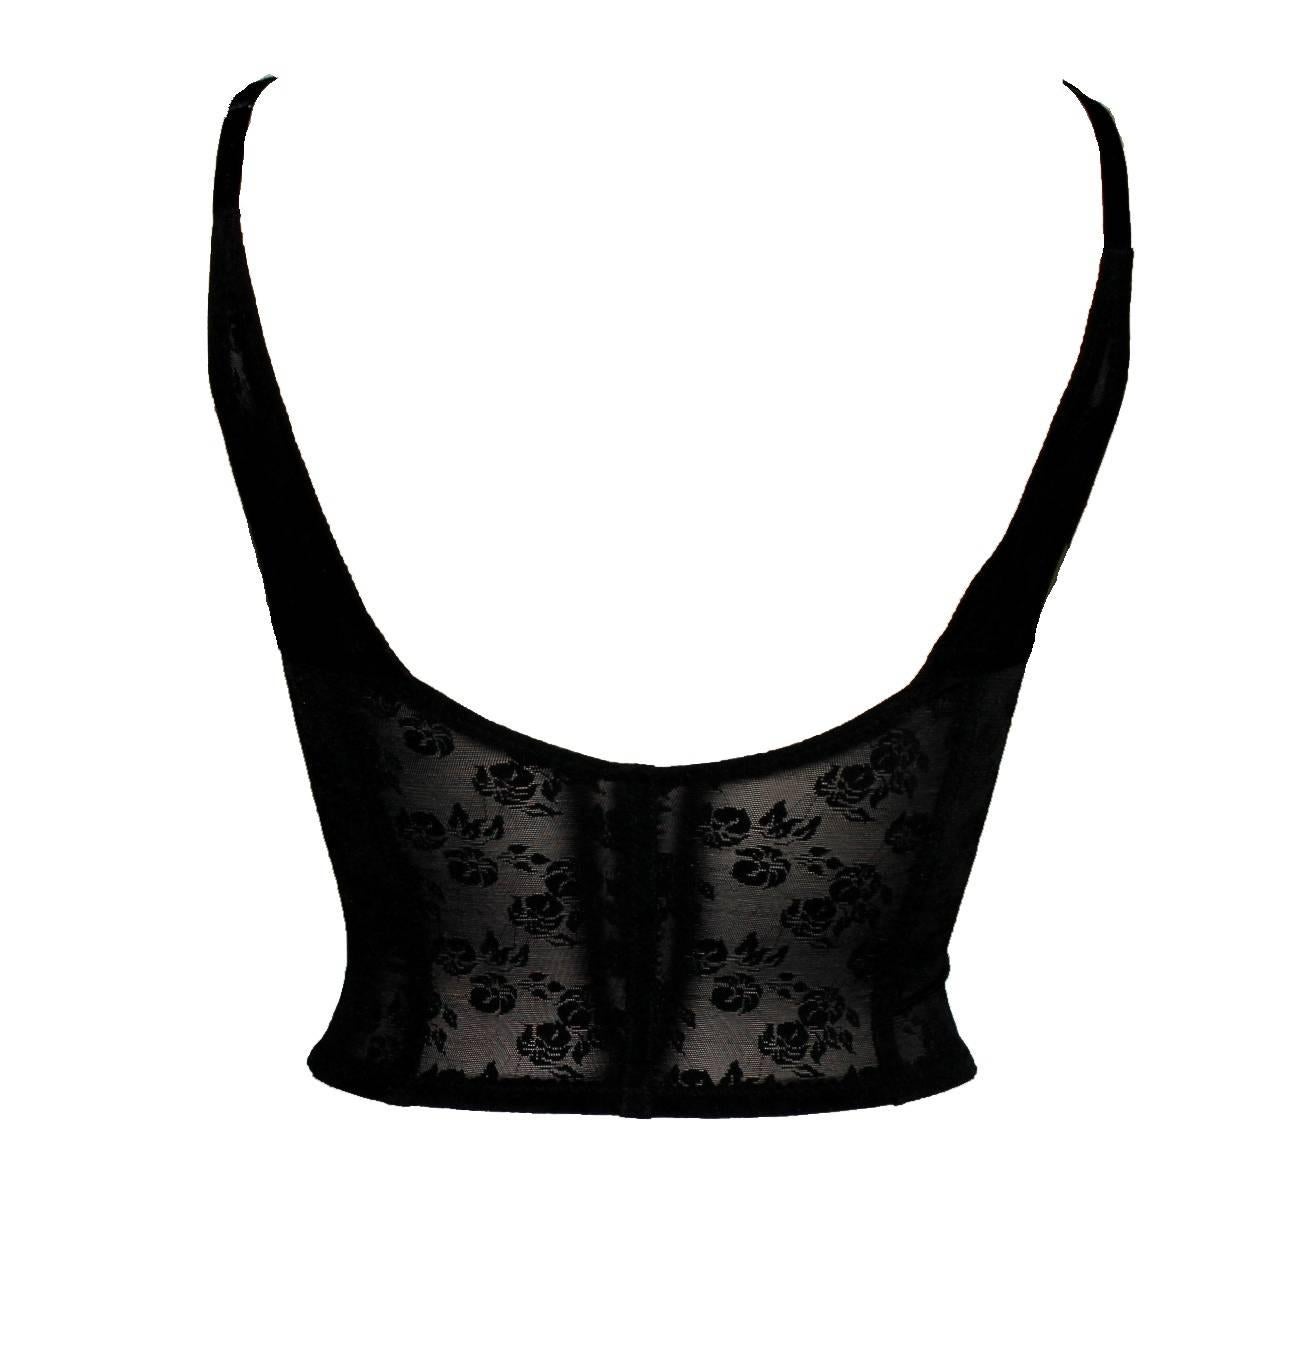 DOLCE & GABBANA

BLACK CORSAGE CORSET TOP

FROM THE 1989 COLLECTION, WORN ON RUNWAY BY NAOMI

PERFECTLY TO WEAR WITH ANY LACE TOP, DRESS OR UNDER A JACKET OR CARDIGAN!

SO VERSATILE

Gorgeous Dolce & Gabbana Corset Top
From 1989